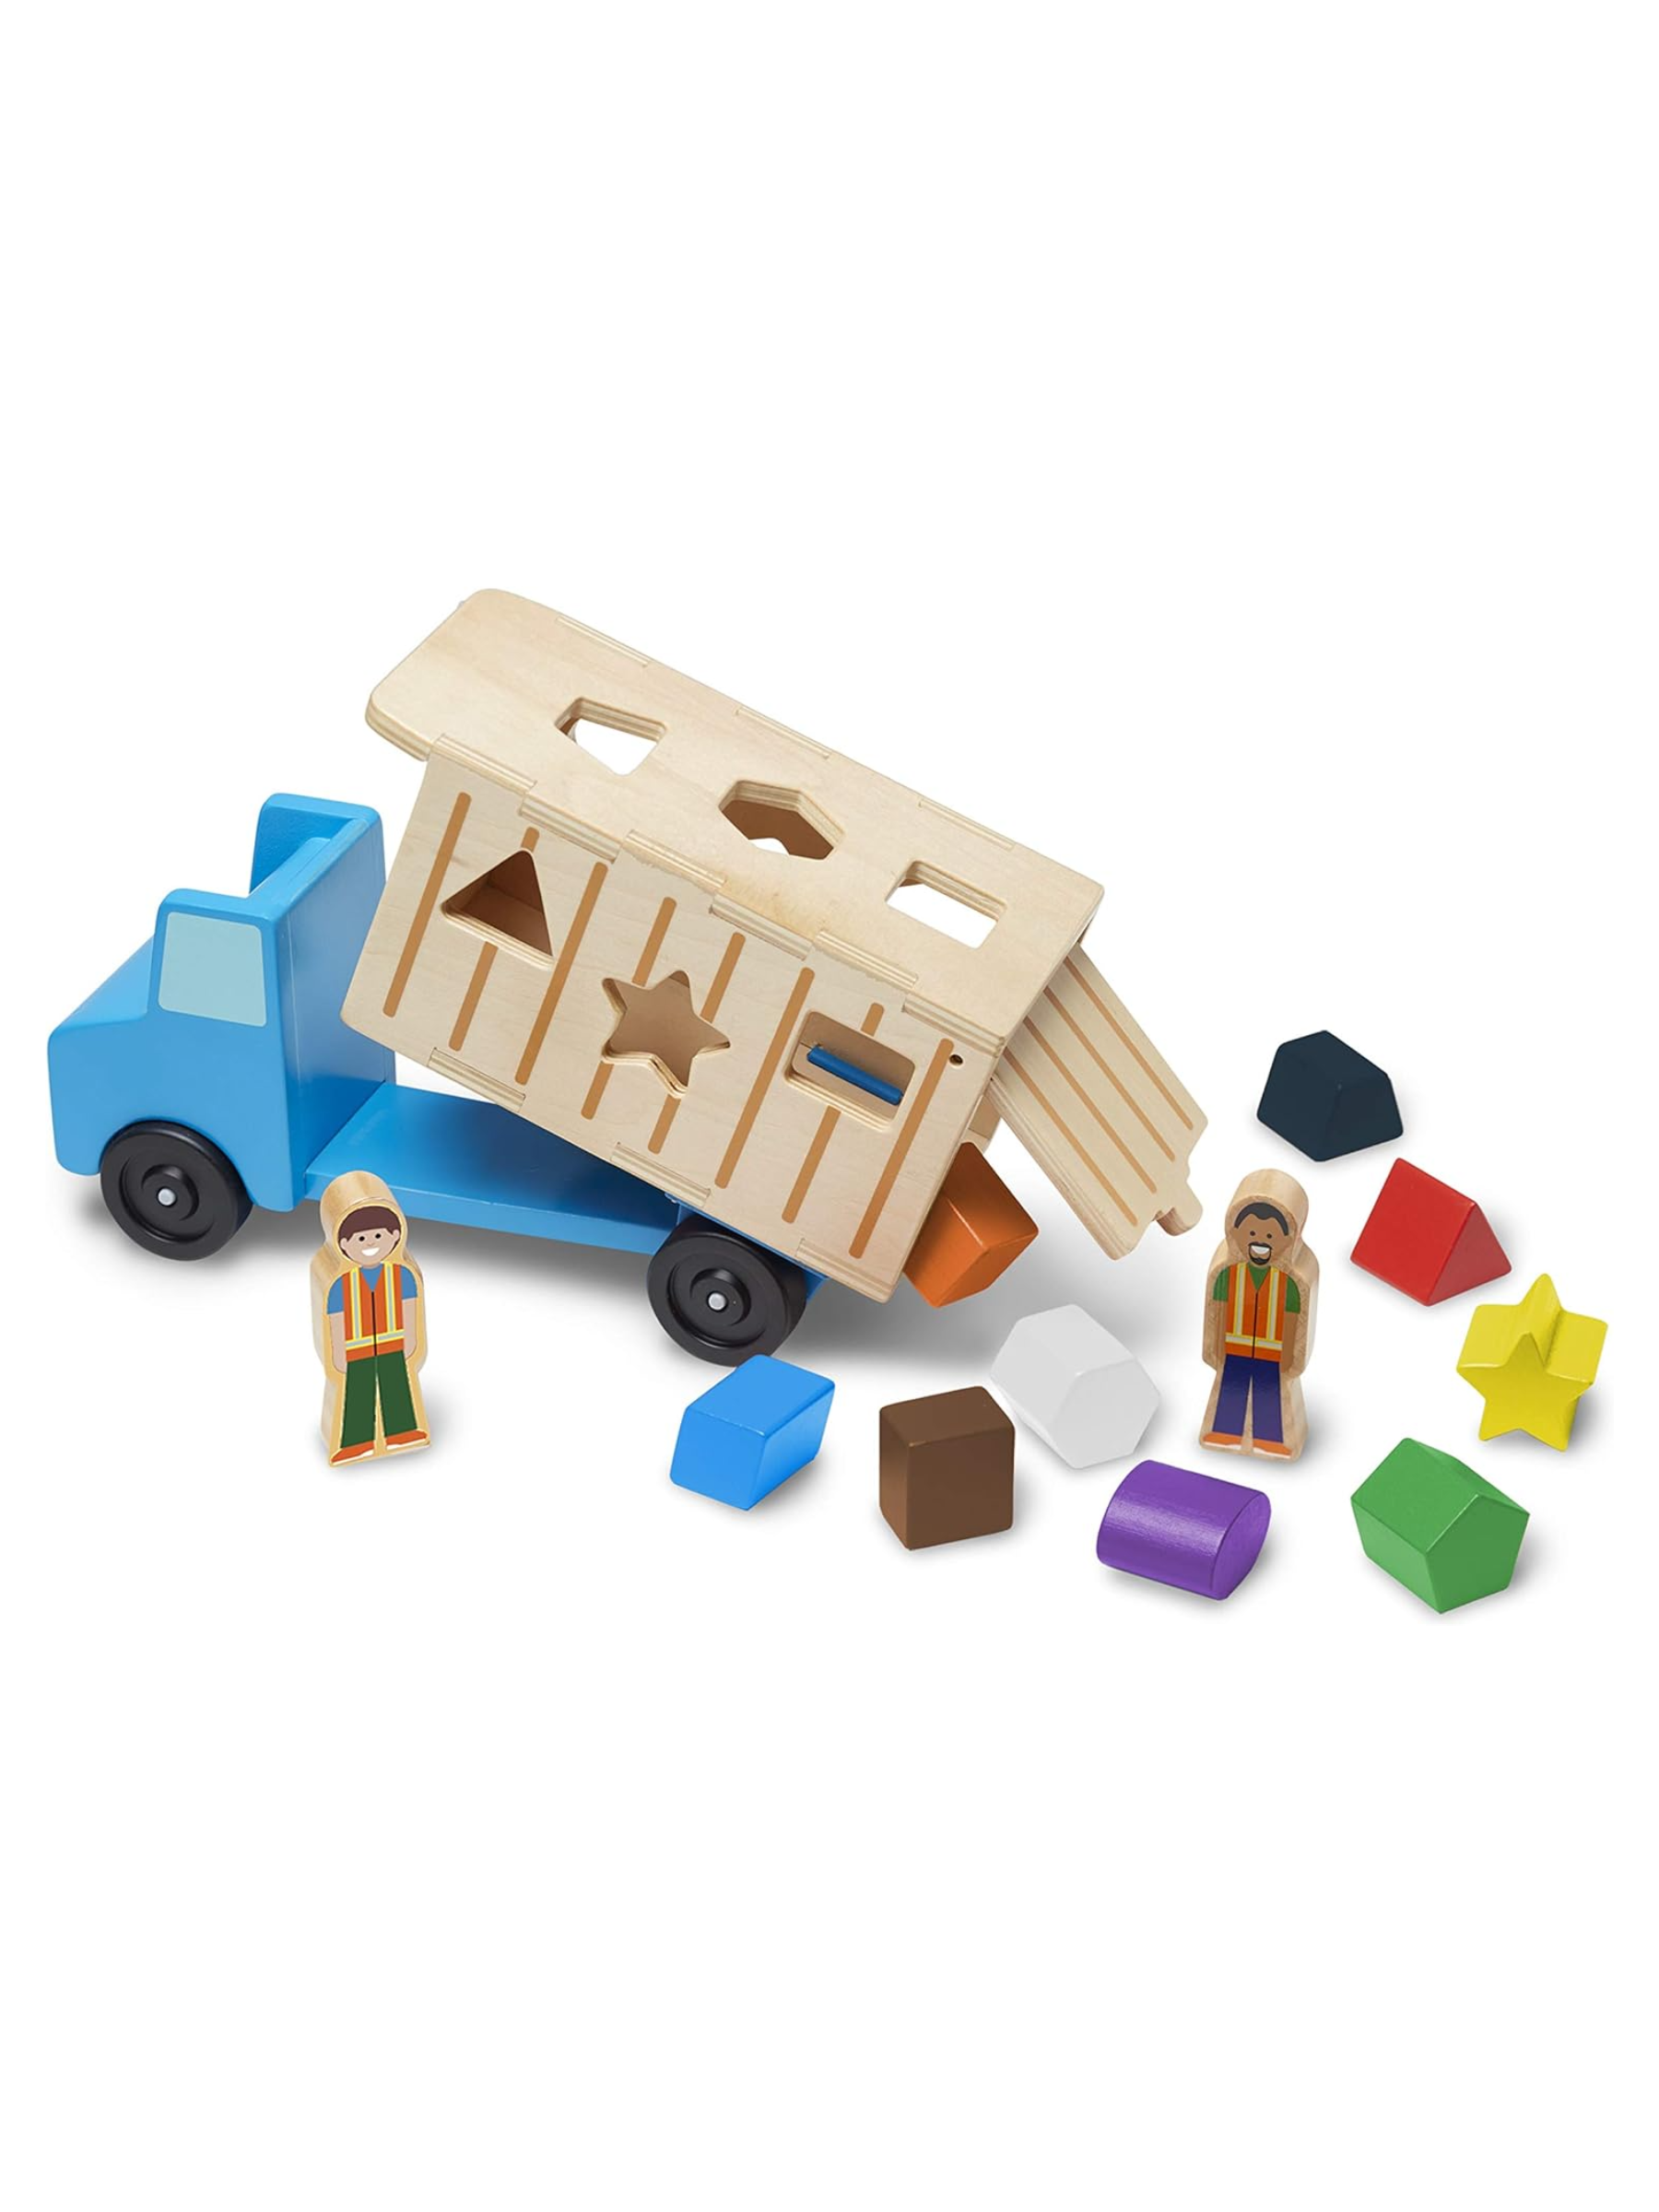 For truck-obsessed one-year-olds (they’re a dime a dozen!), you can’t beat this wooden dump truck by renowned kids’ toy brand Melissa & Doug. It’s not just any old truck they can zoom around (though they totally can!), it’s also a shape sorter to help little ones hone fine motor skills and develop skills like color and shape identification. <br> <br> <strong>What our expert says:</strong> “This is a high-quality wooden toy that got a lot of love in our house. There are so many ways to play, the kids never seemed to tire of it.” — Earley $28, Amazon. <a href="https://www.amazon.com/Melissa-Doug-Shape-Sorting-Craftsmanship-Colorful/dp/B012WE829M">Get it now!</a><p>Sign up for today’s biggest stories, from pop culture to politics.</p><a href="https://www.glamour.com/newsletter/news?sourceCode=msnsend">Sign Up</a>